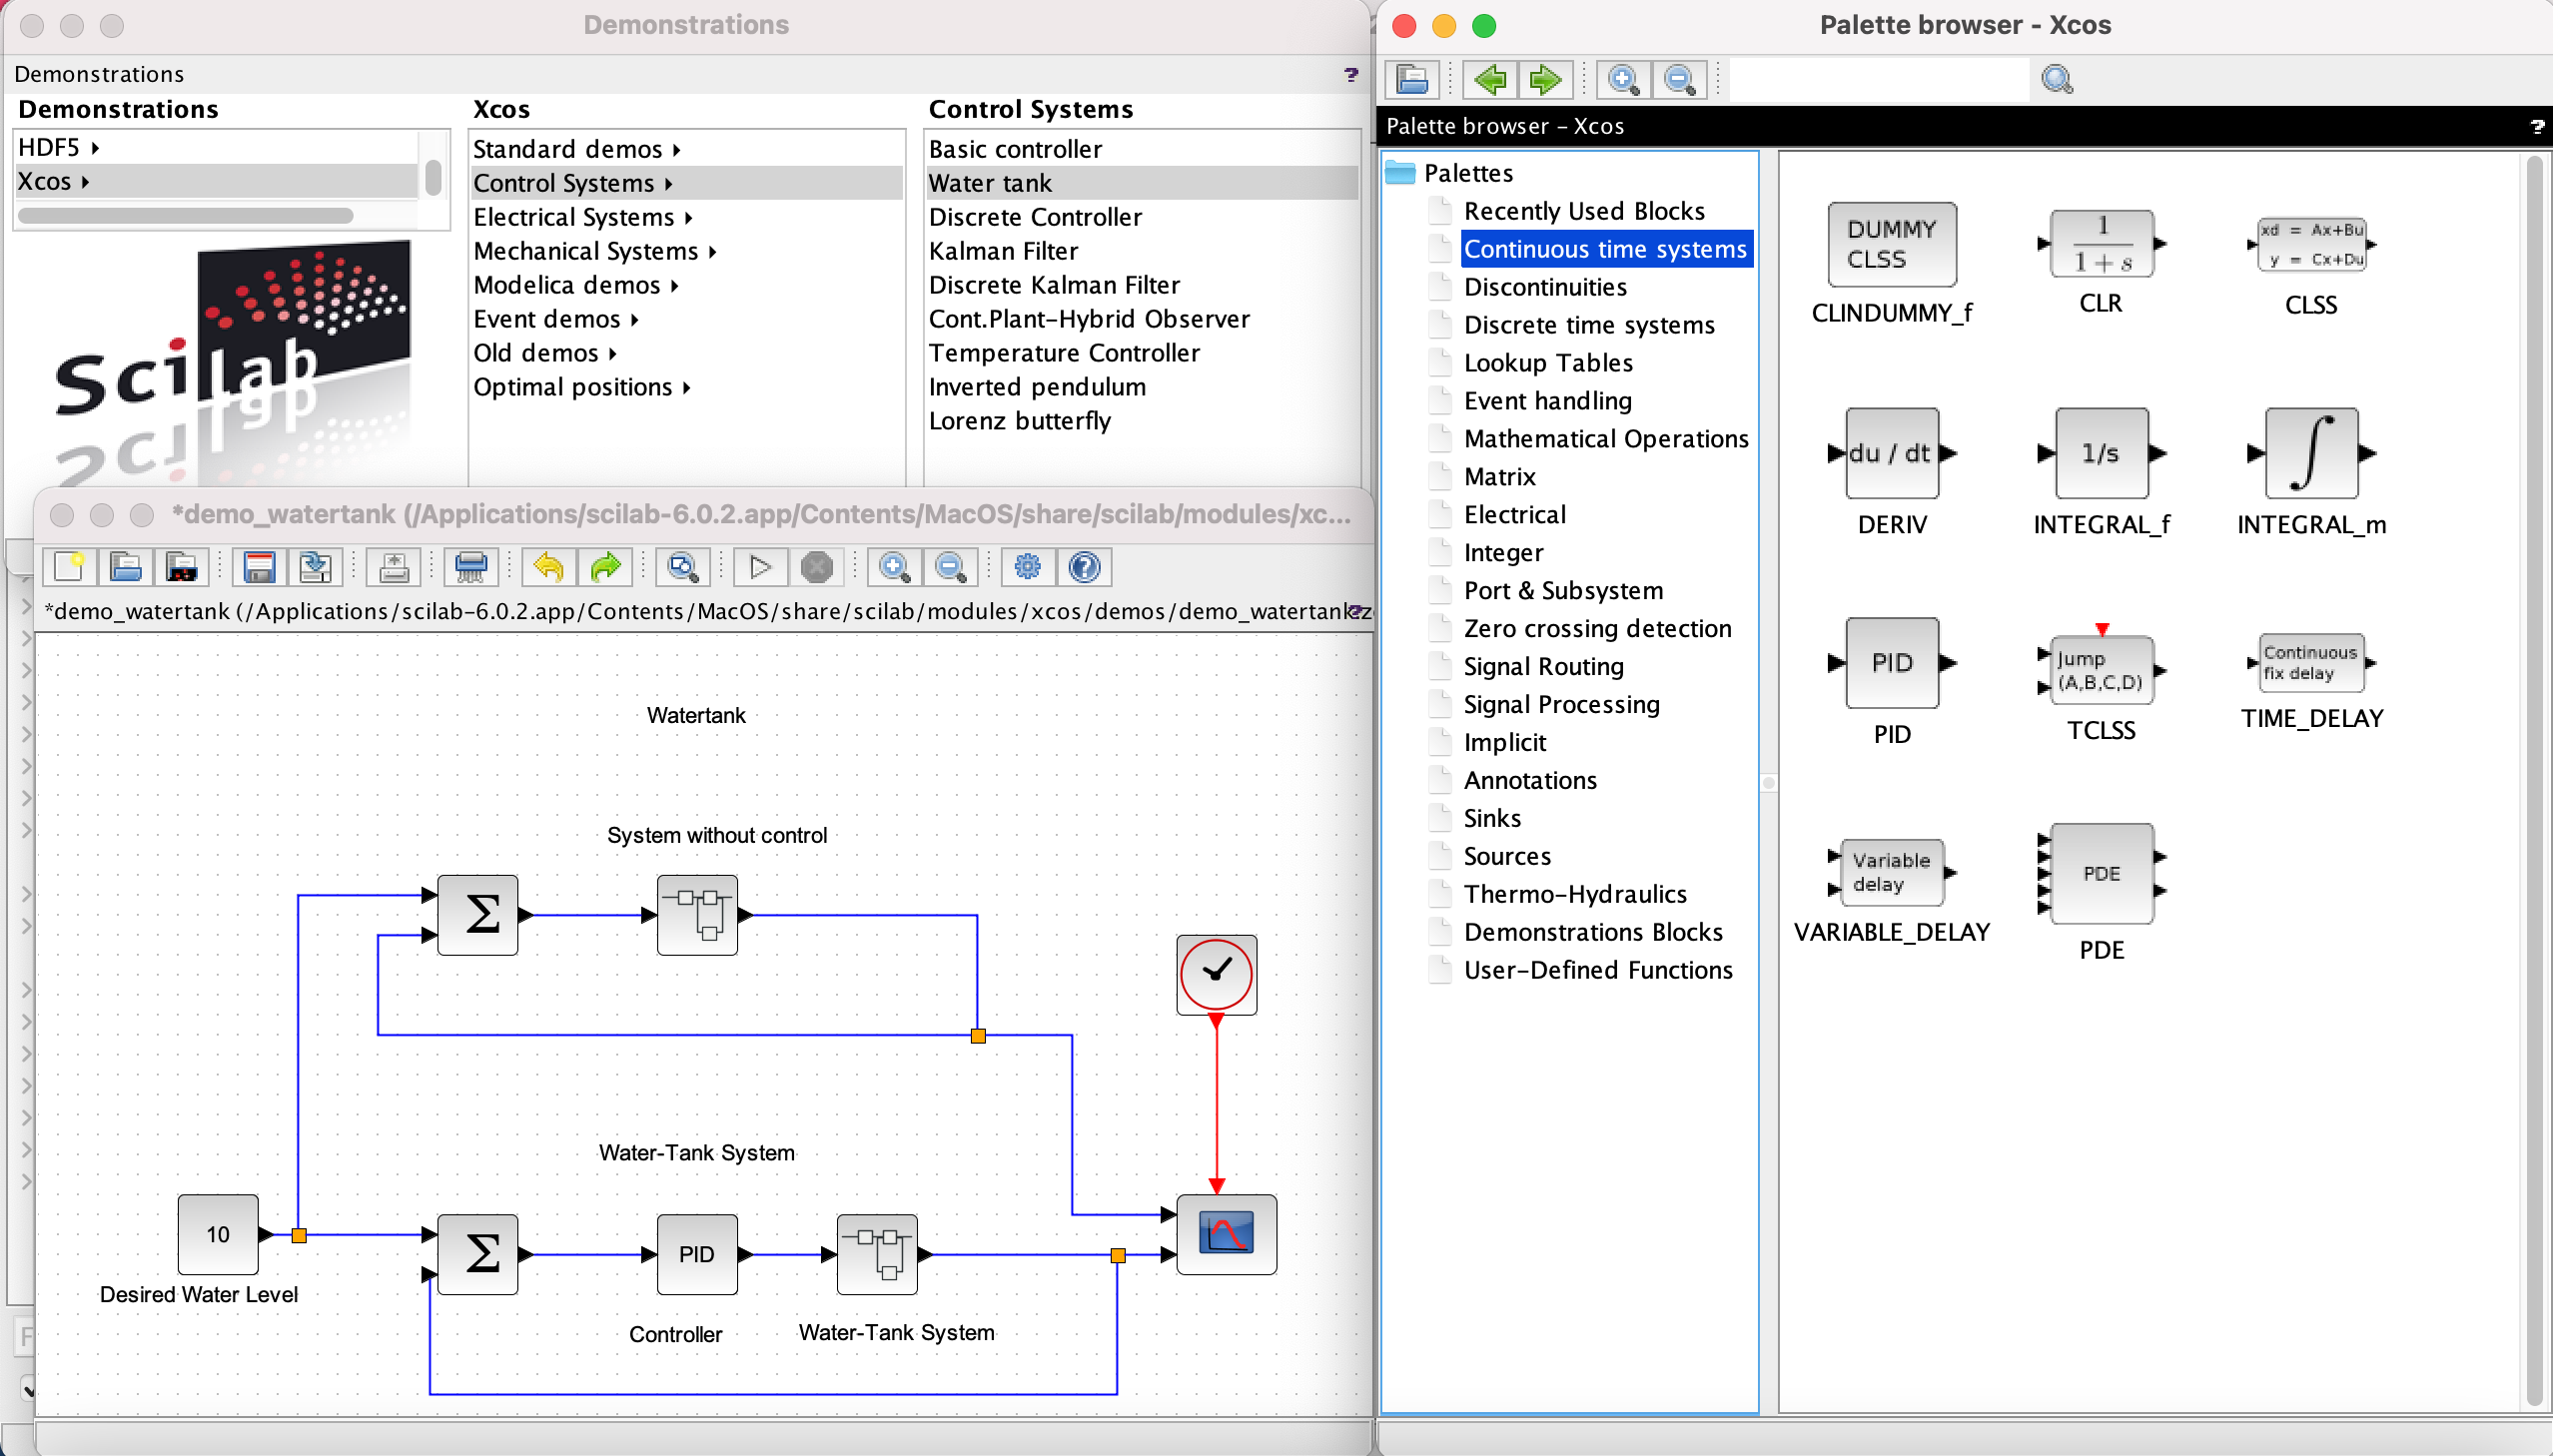 The snapshot above shows one of the demonstrations in Scilab's Xcos. It is a good example of a PID controller. Also in the picture are some of the blocks in Scilab. Of course since this product is open source you can go check this out for yourself.